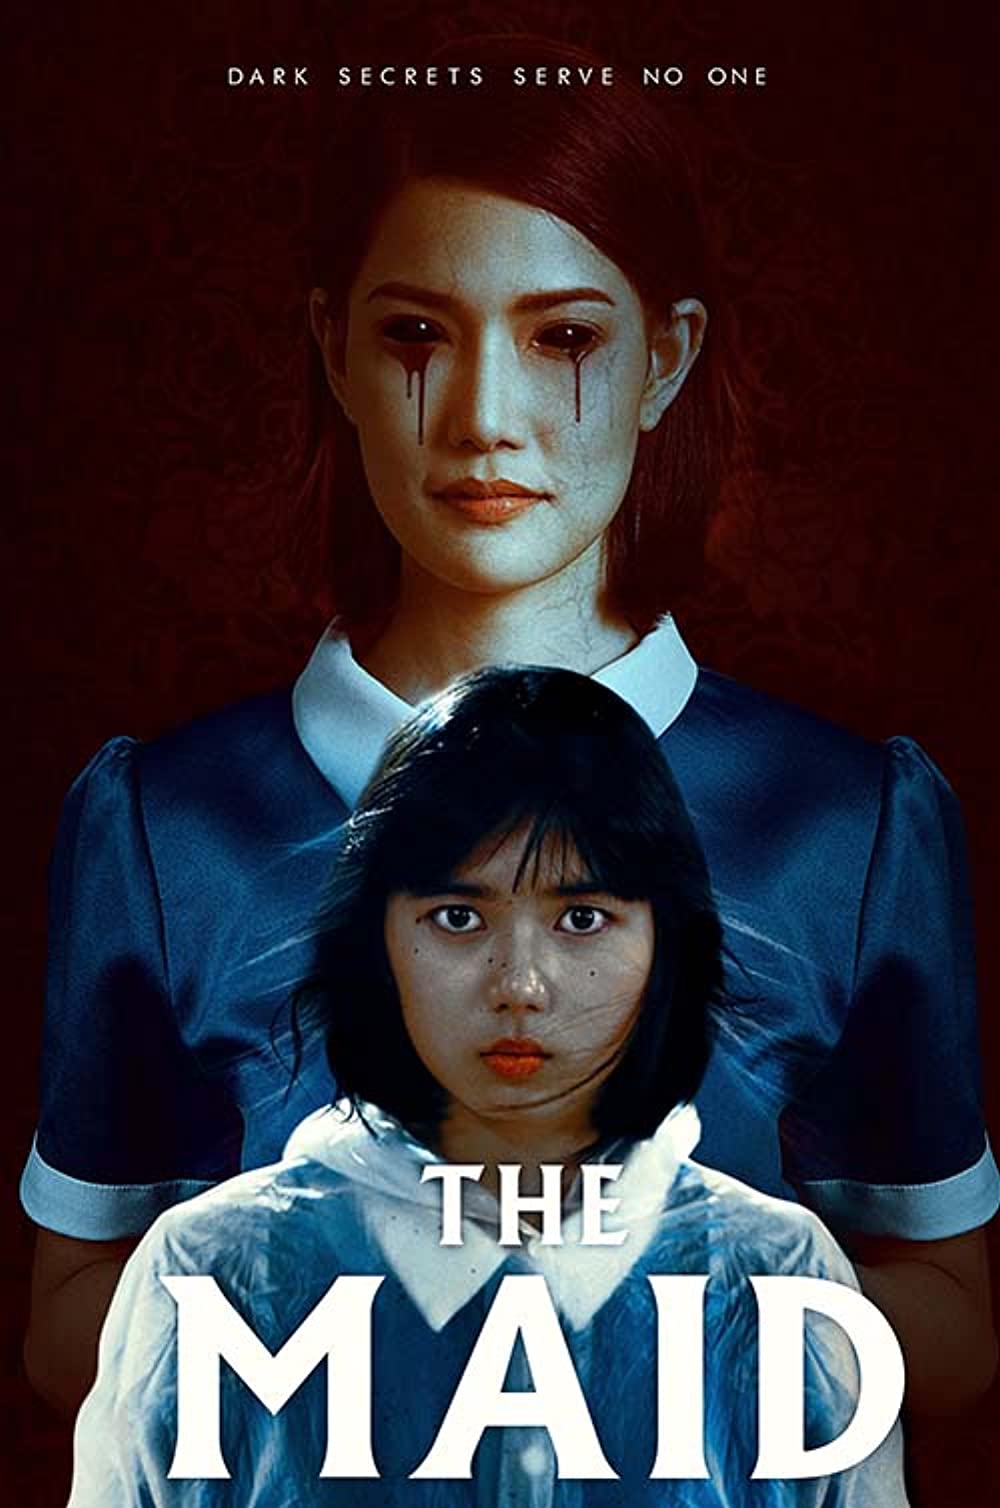 The Maid 2021 Film Review Thai Horror At Frightfest 